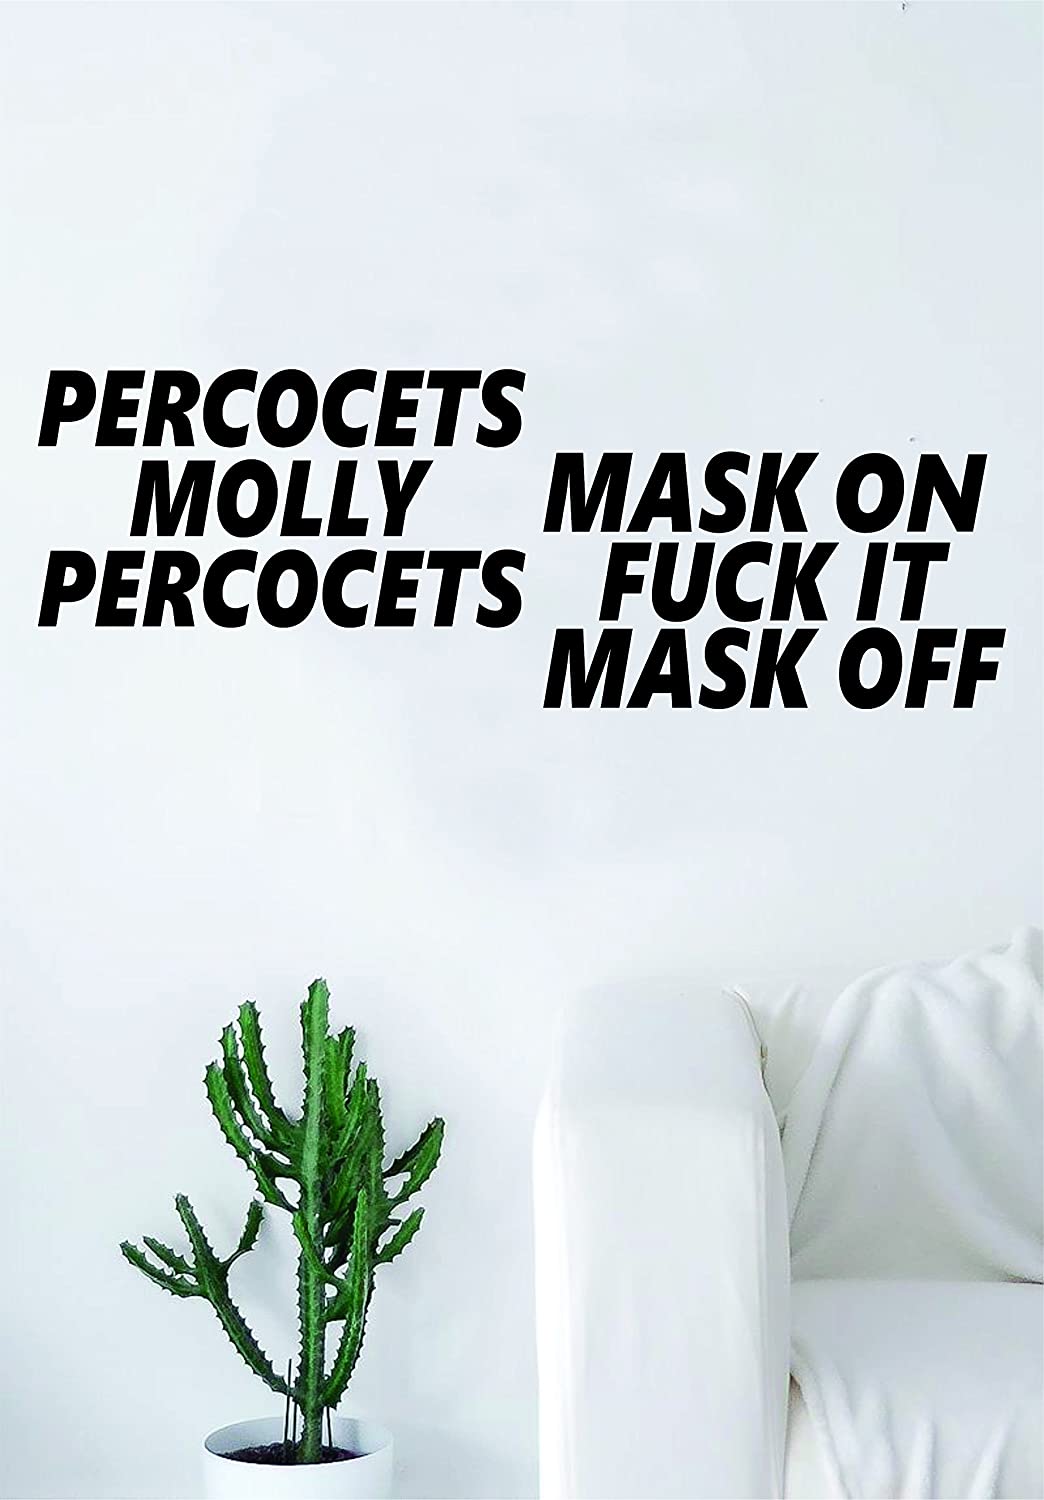 Future mask on mask off percocets molly percocets Blank Meme Template